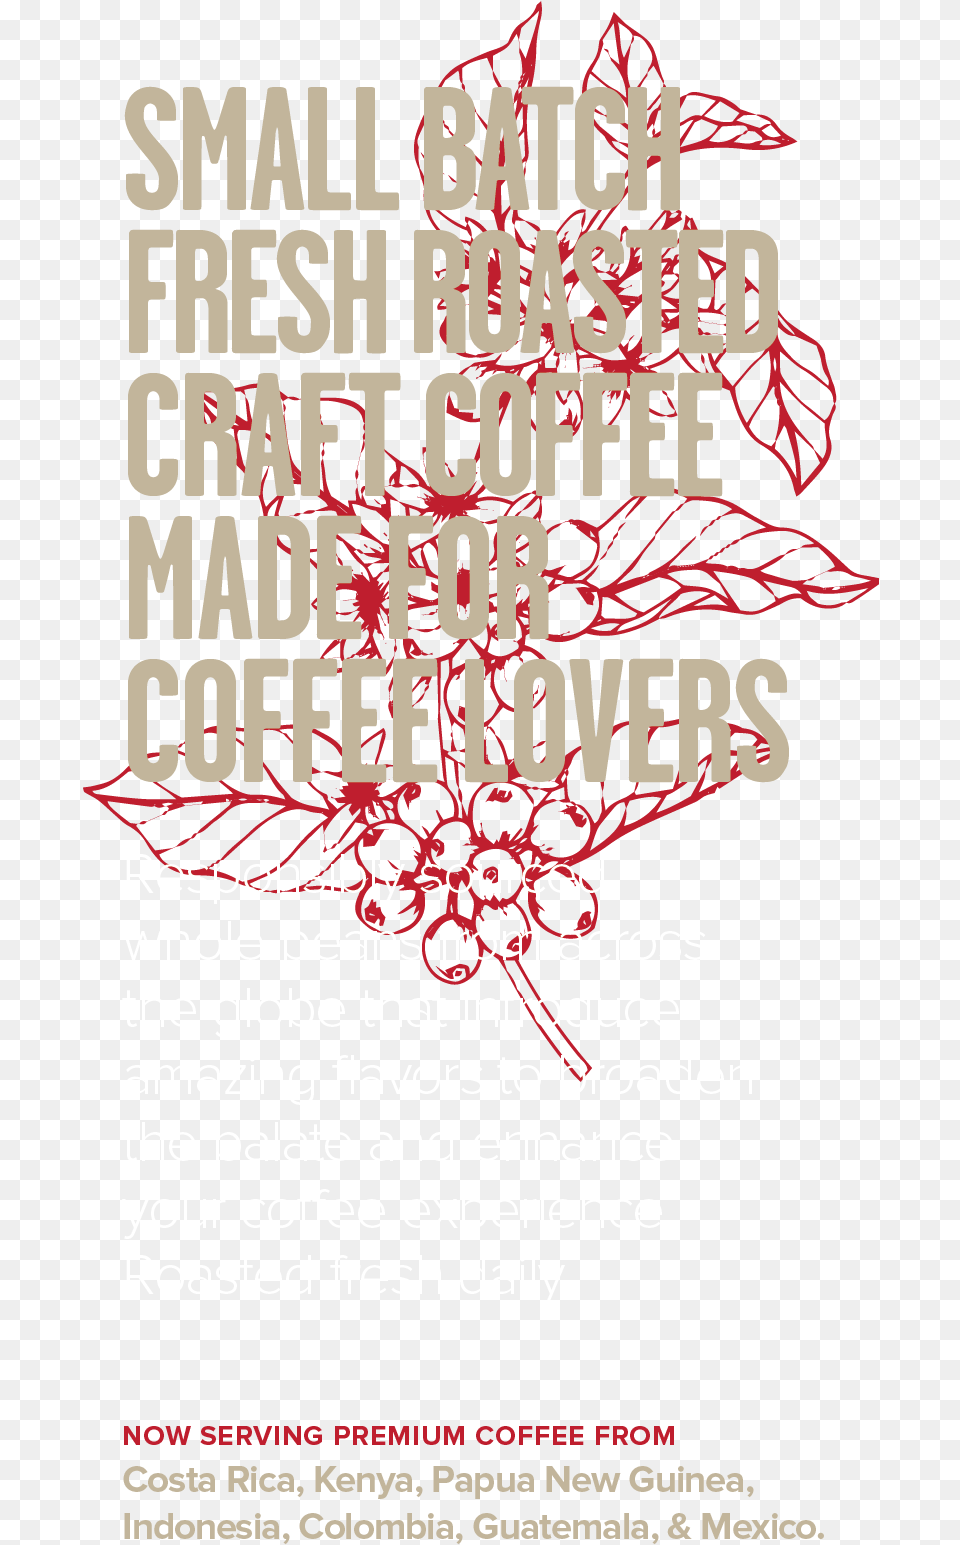 Brew Coffee Spot Graphic Design, Advertisement, Poster, Text Png